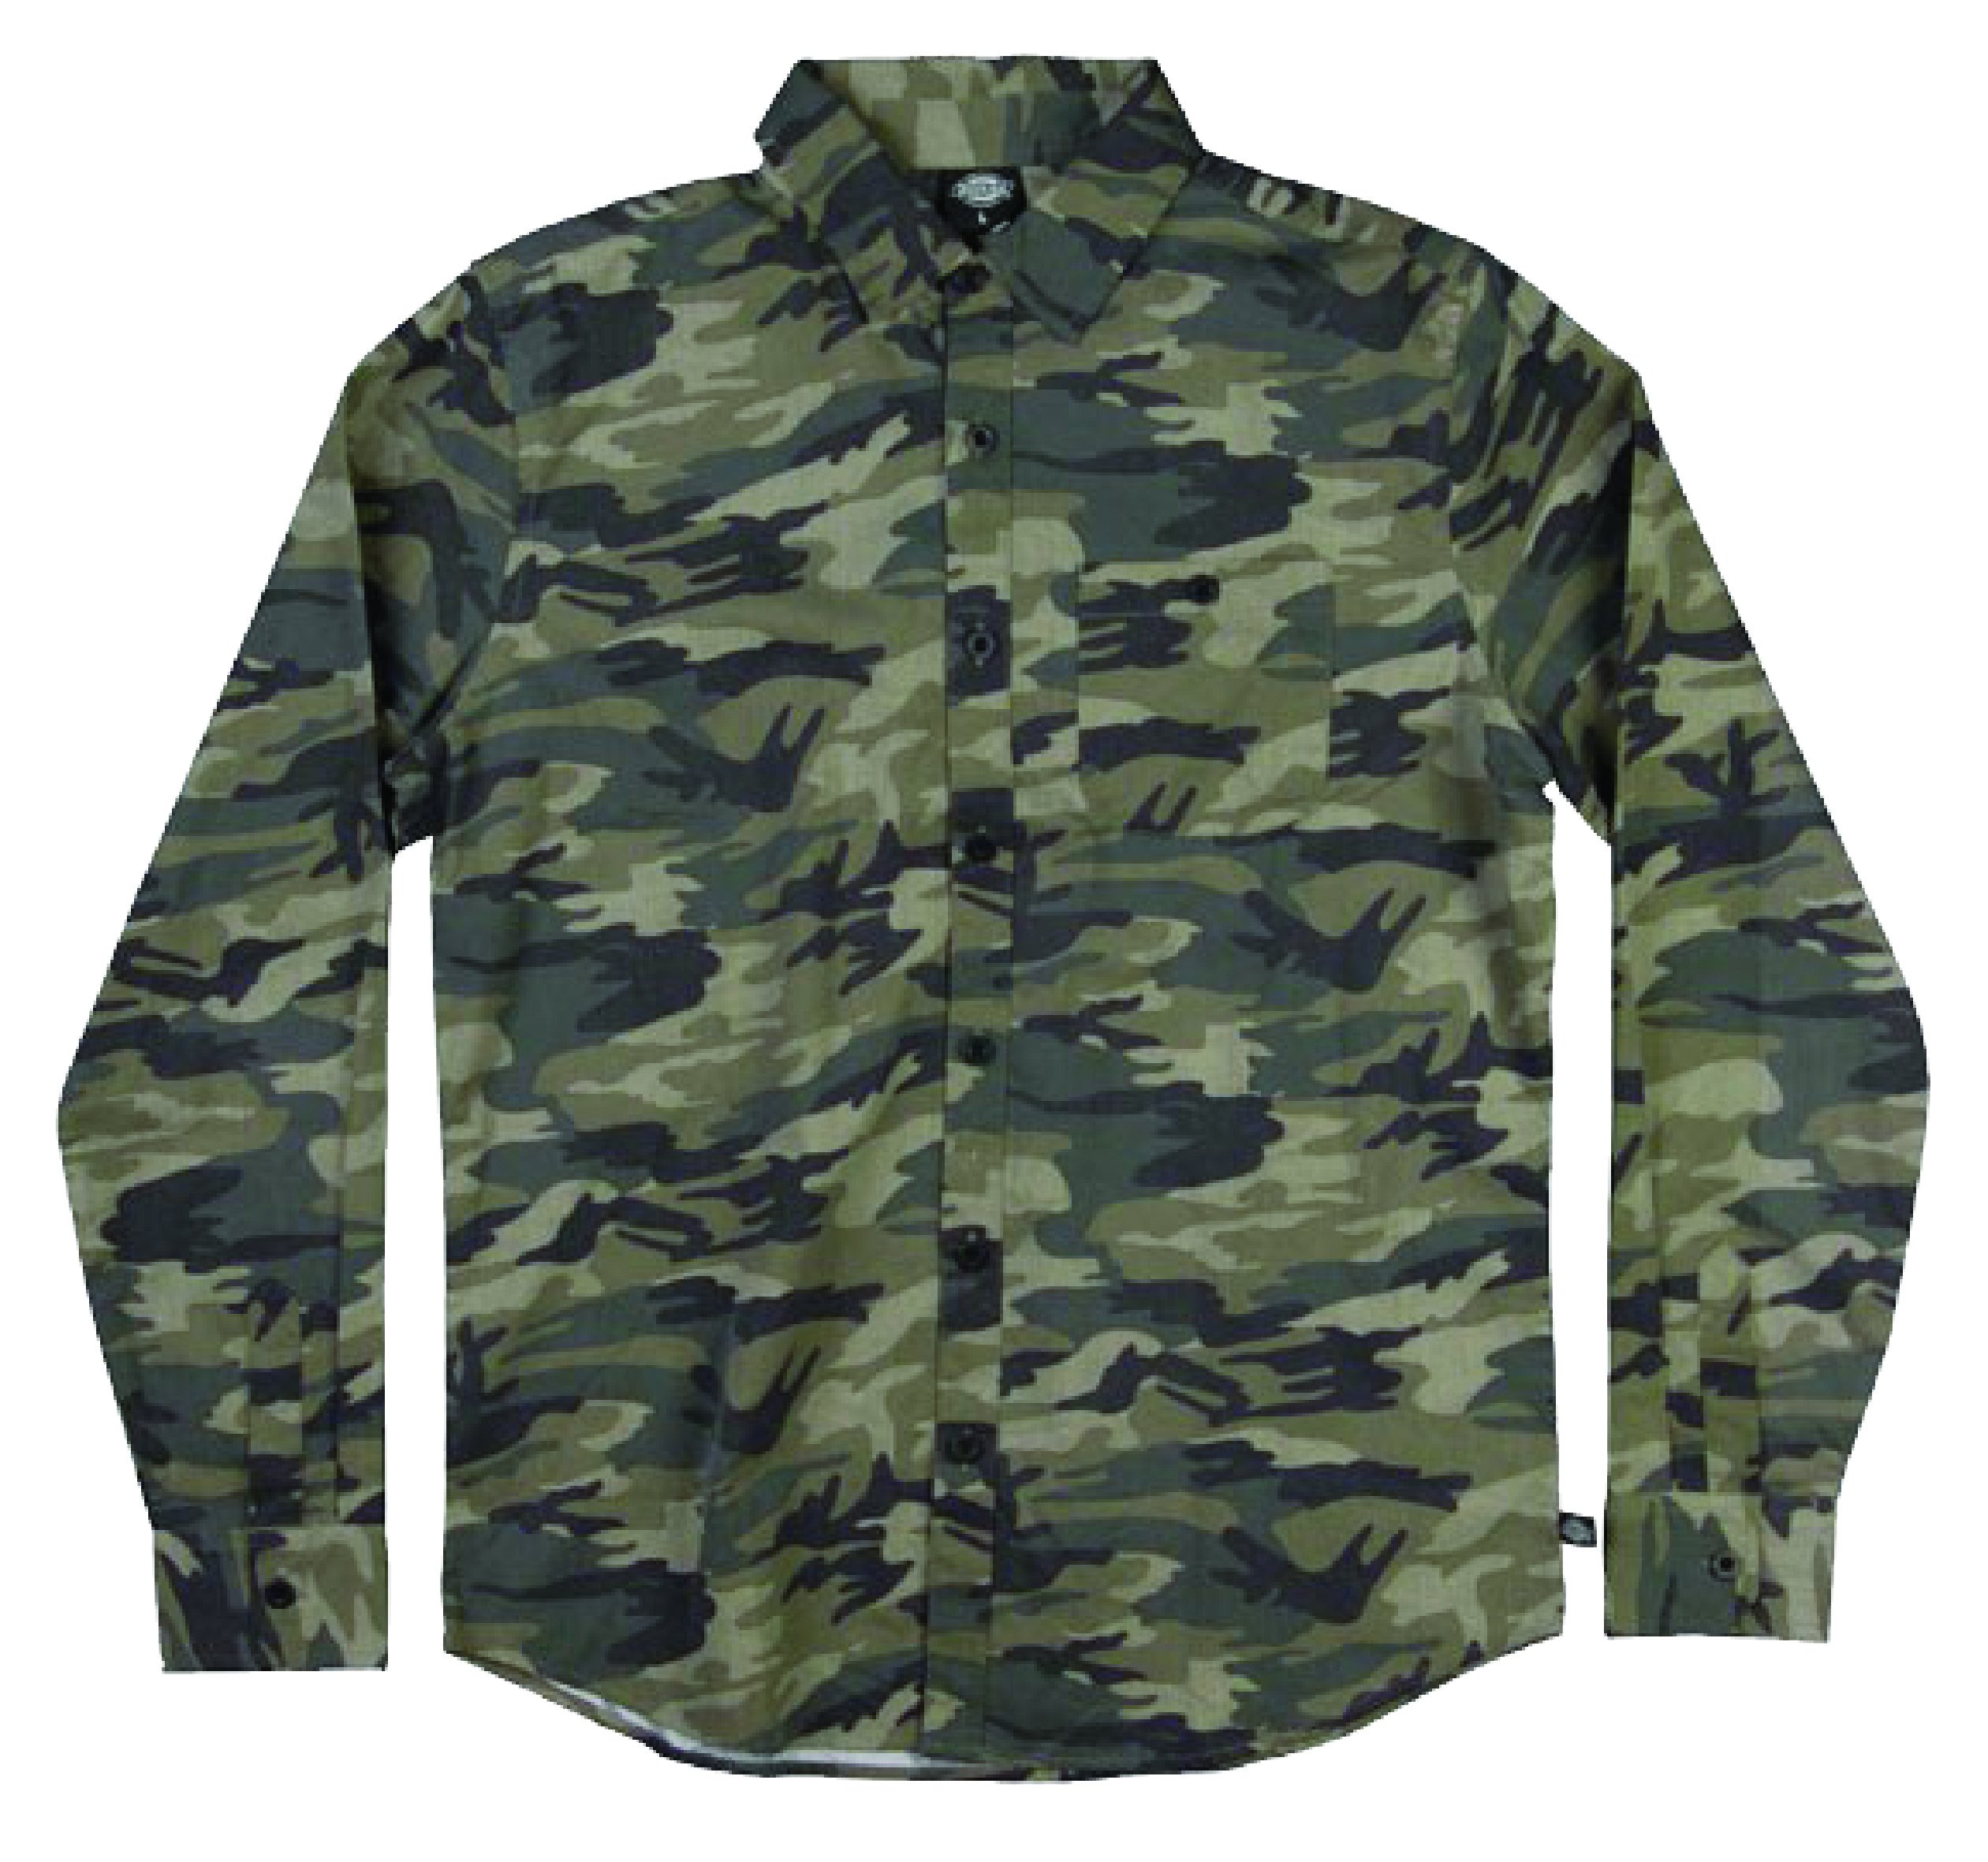 Dickies FT Hood Shirt - Tops-T-shirts : All Out Co. - DICKIES